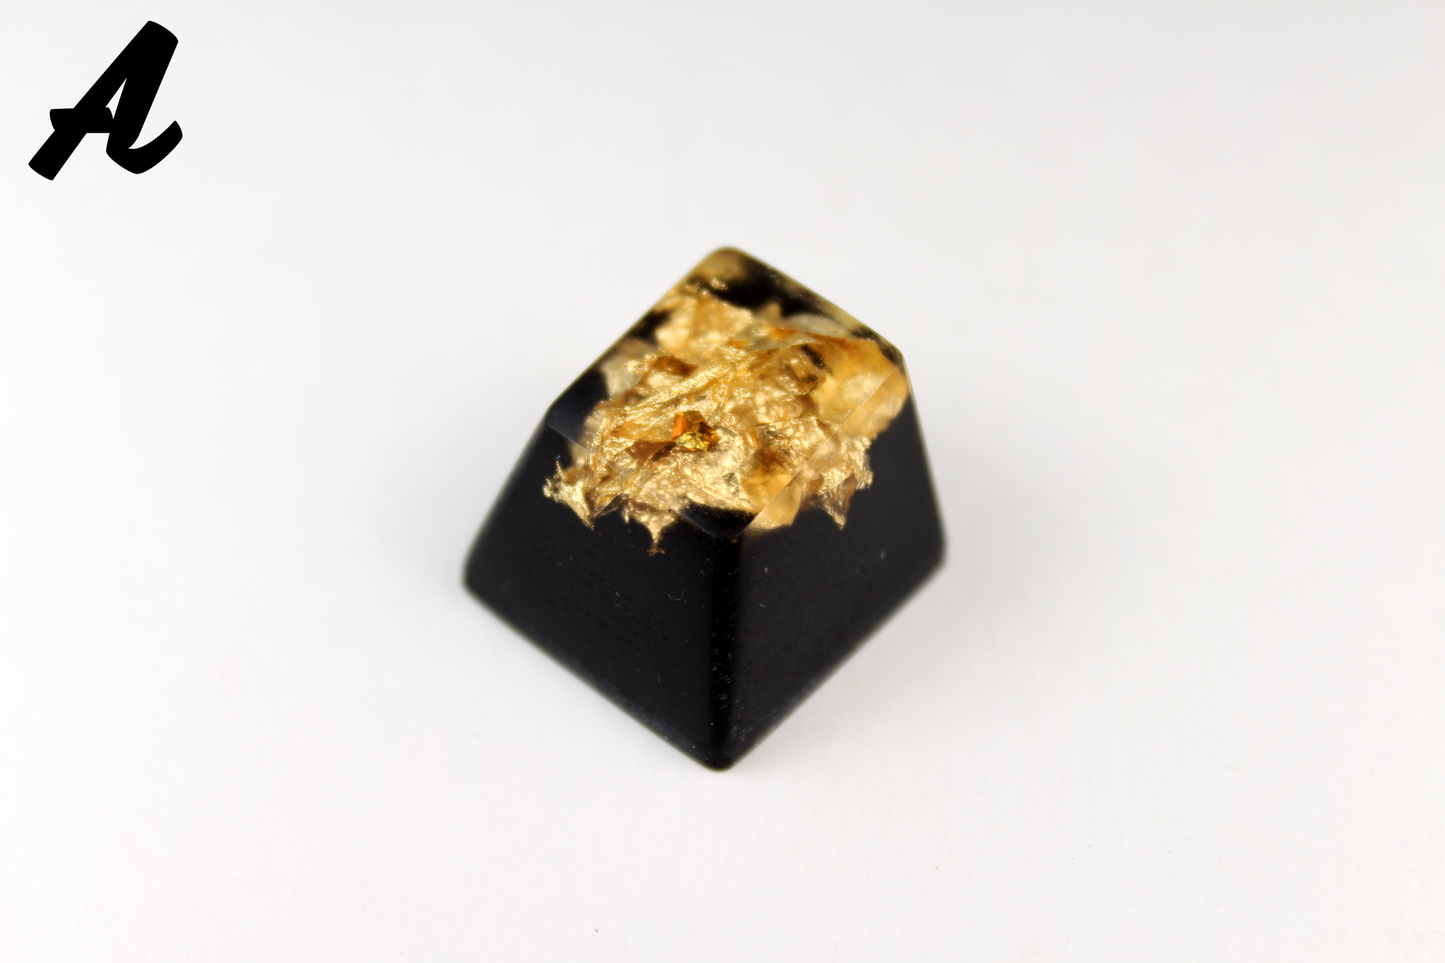 Chaos Caps 1.1 - Gold Flake - PrimeCaps Keycap - Blank and Sculpted Artisan Keycaps for cherry MX mechanical keyboards 